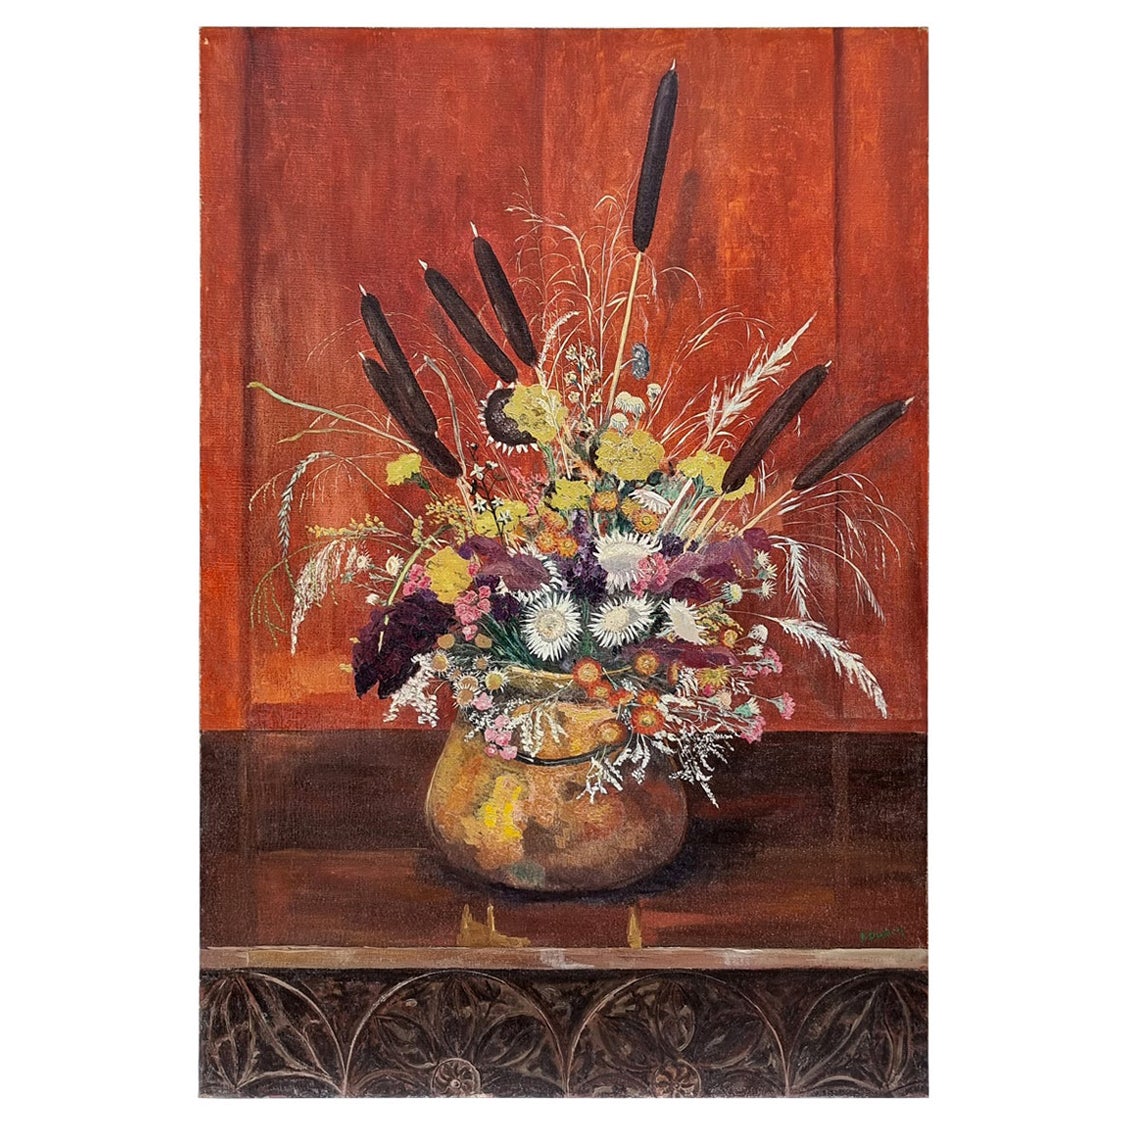 "Winter Flowers" Signed Fernand Dubich, Large Oil Painting from 1958 For Sale